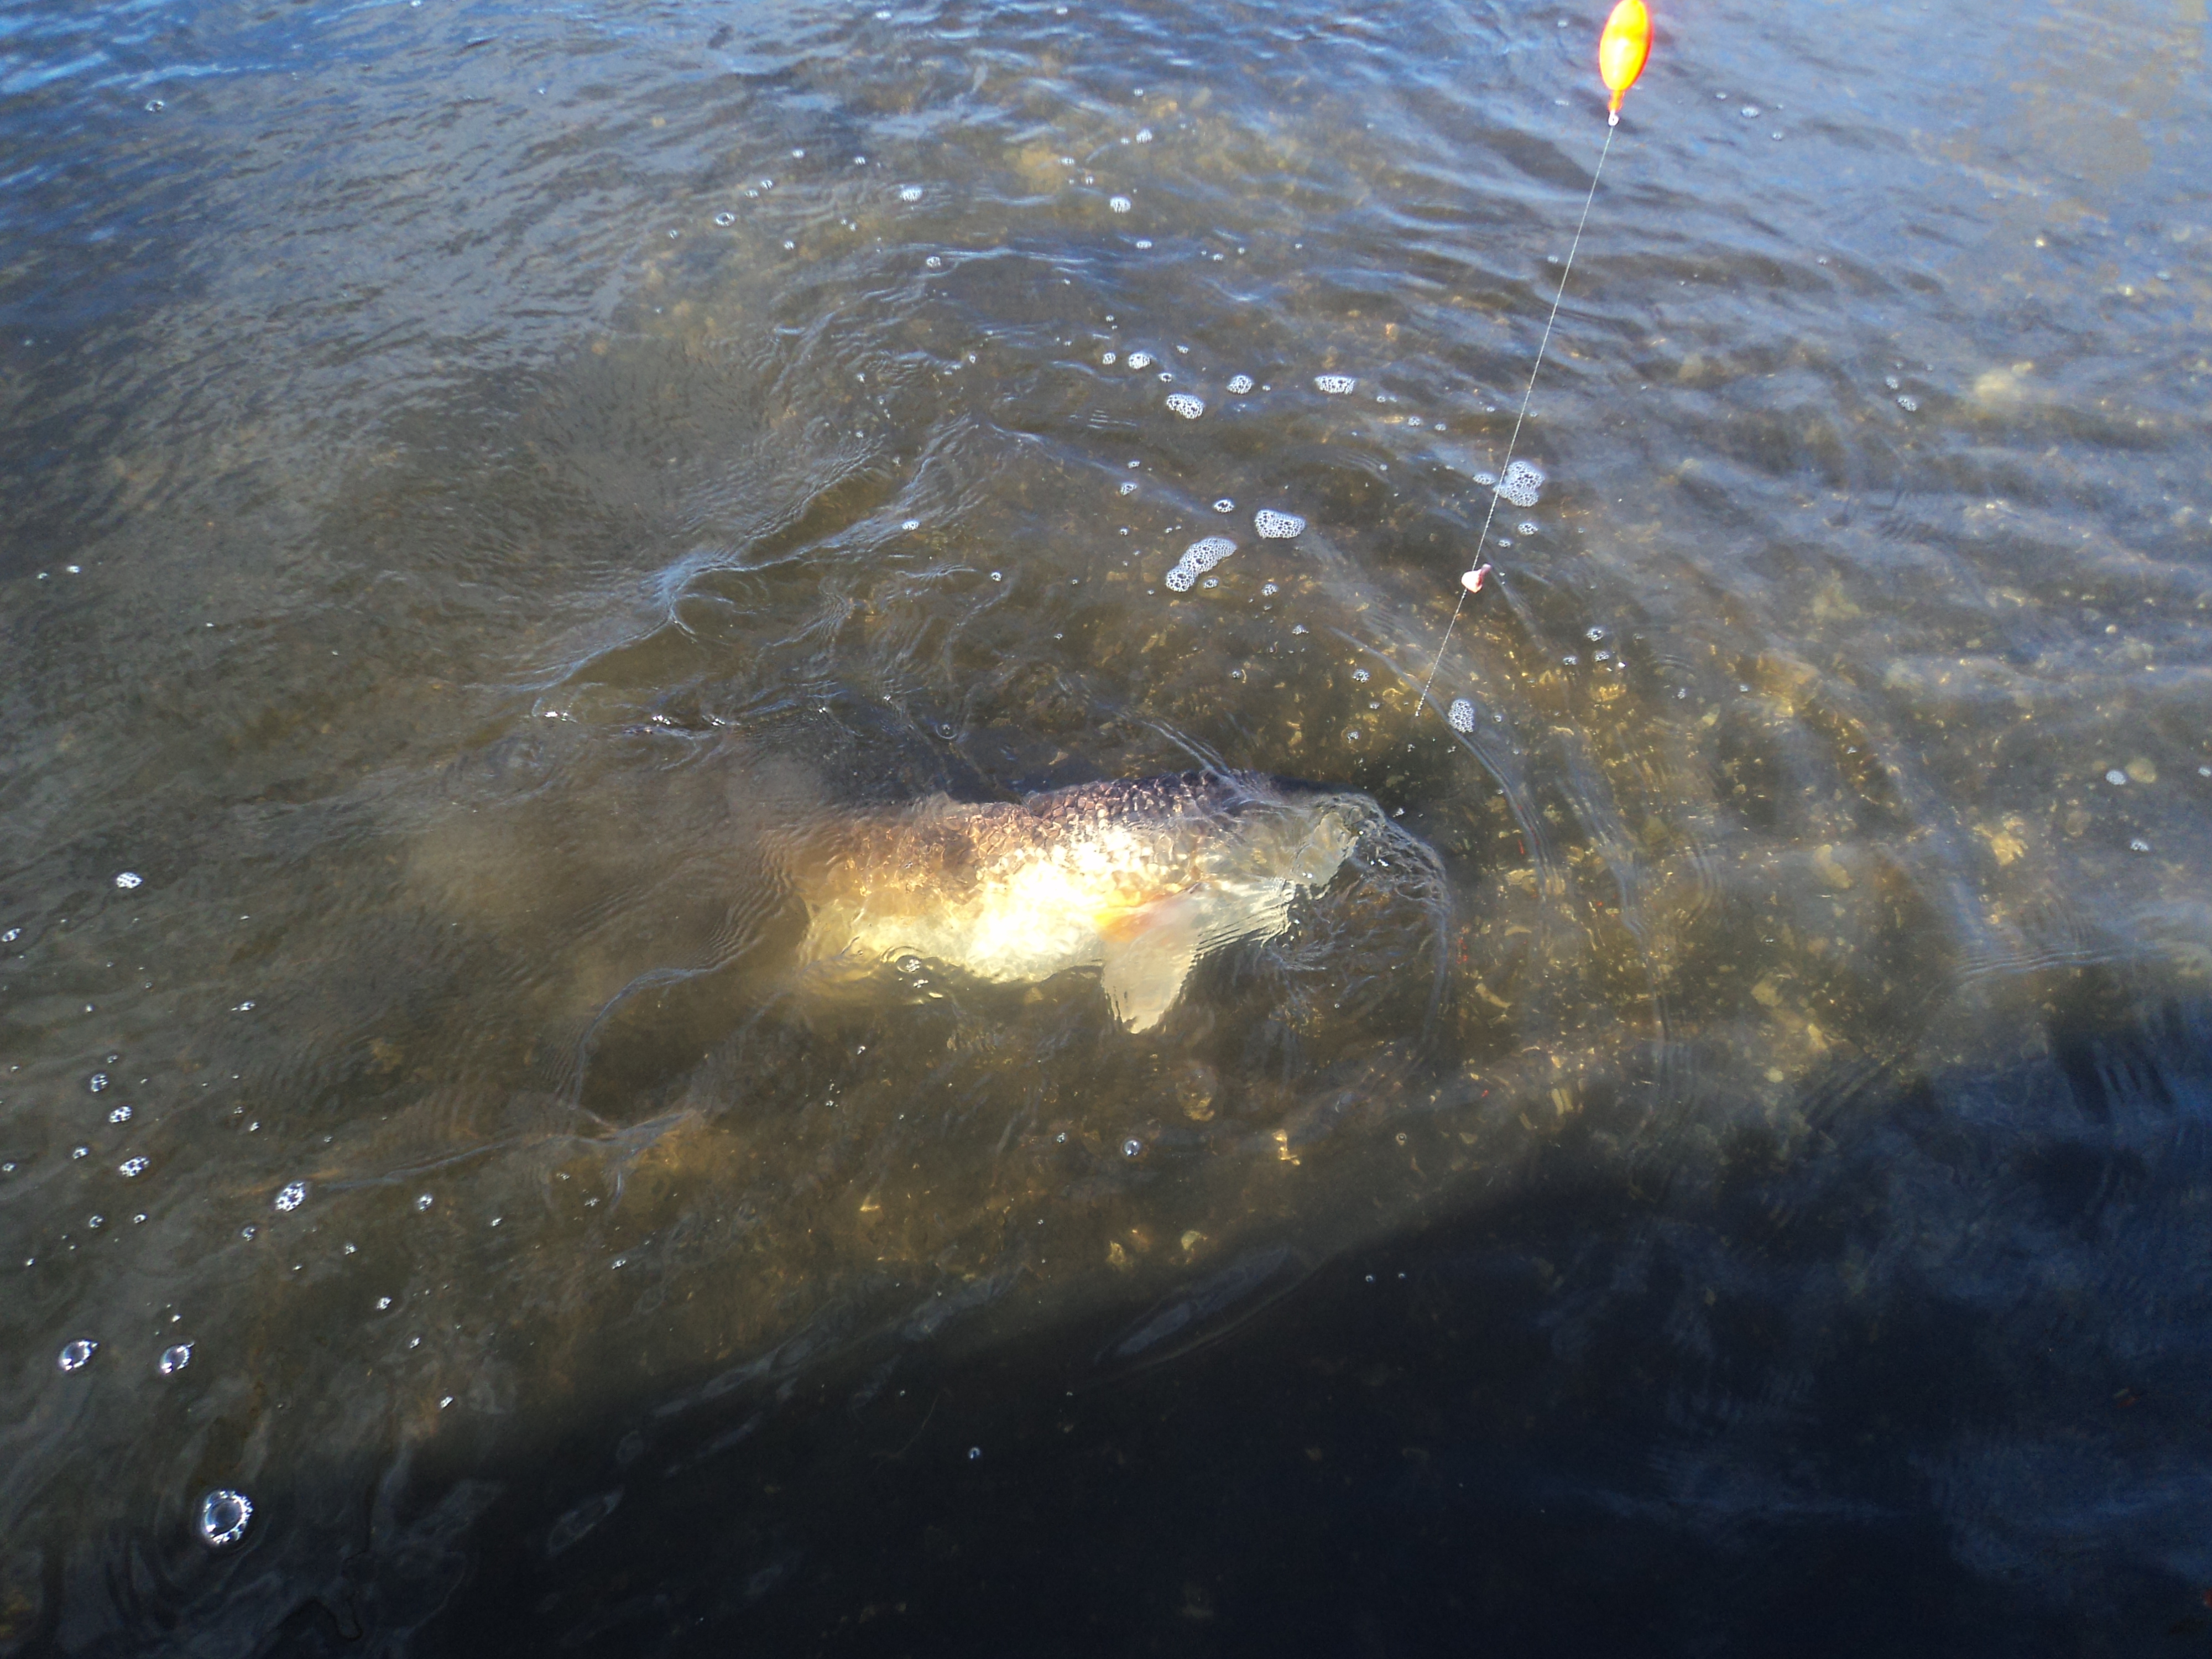 redfish red drum oyster bed reef clean clear water